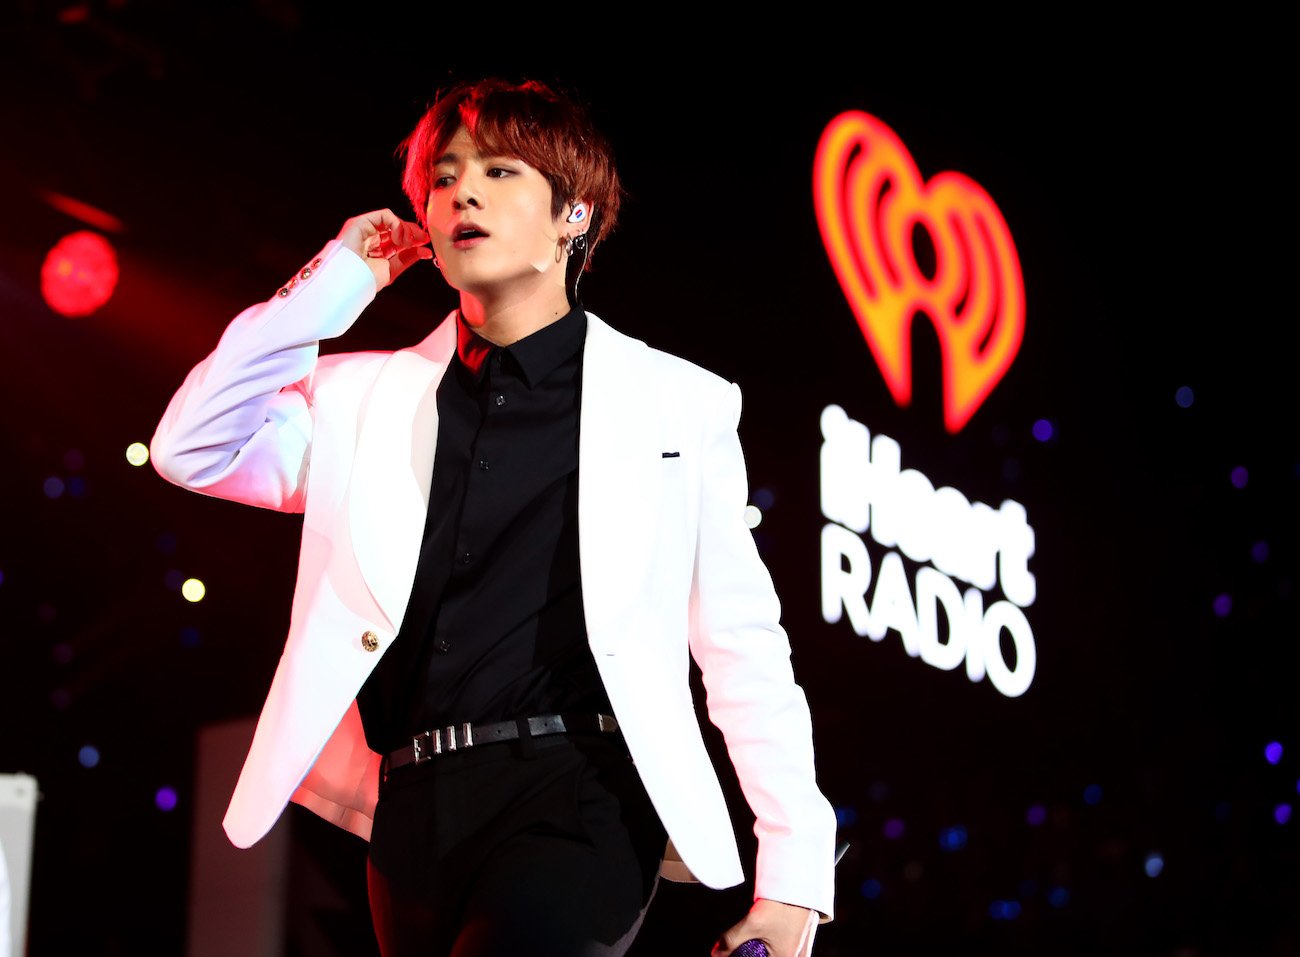 BTS's Jungkook on stage, touching his earpiece